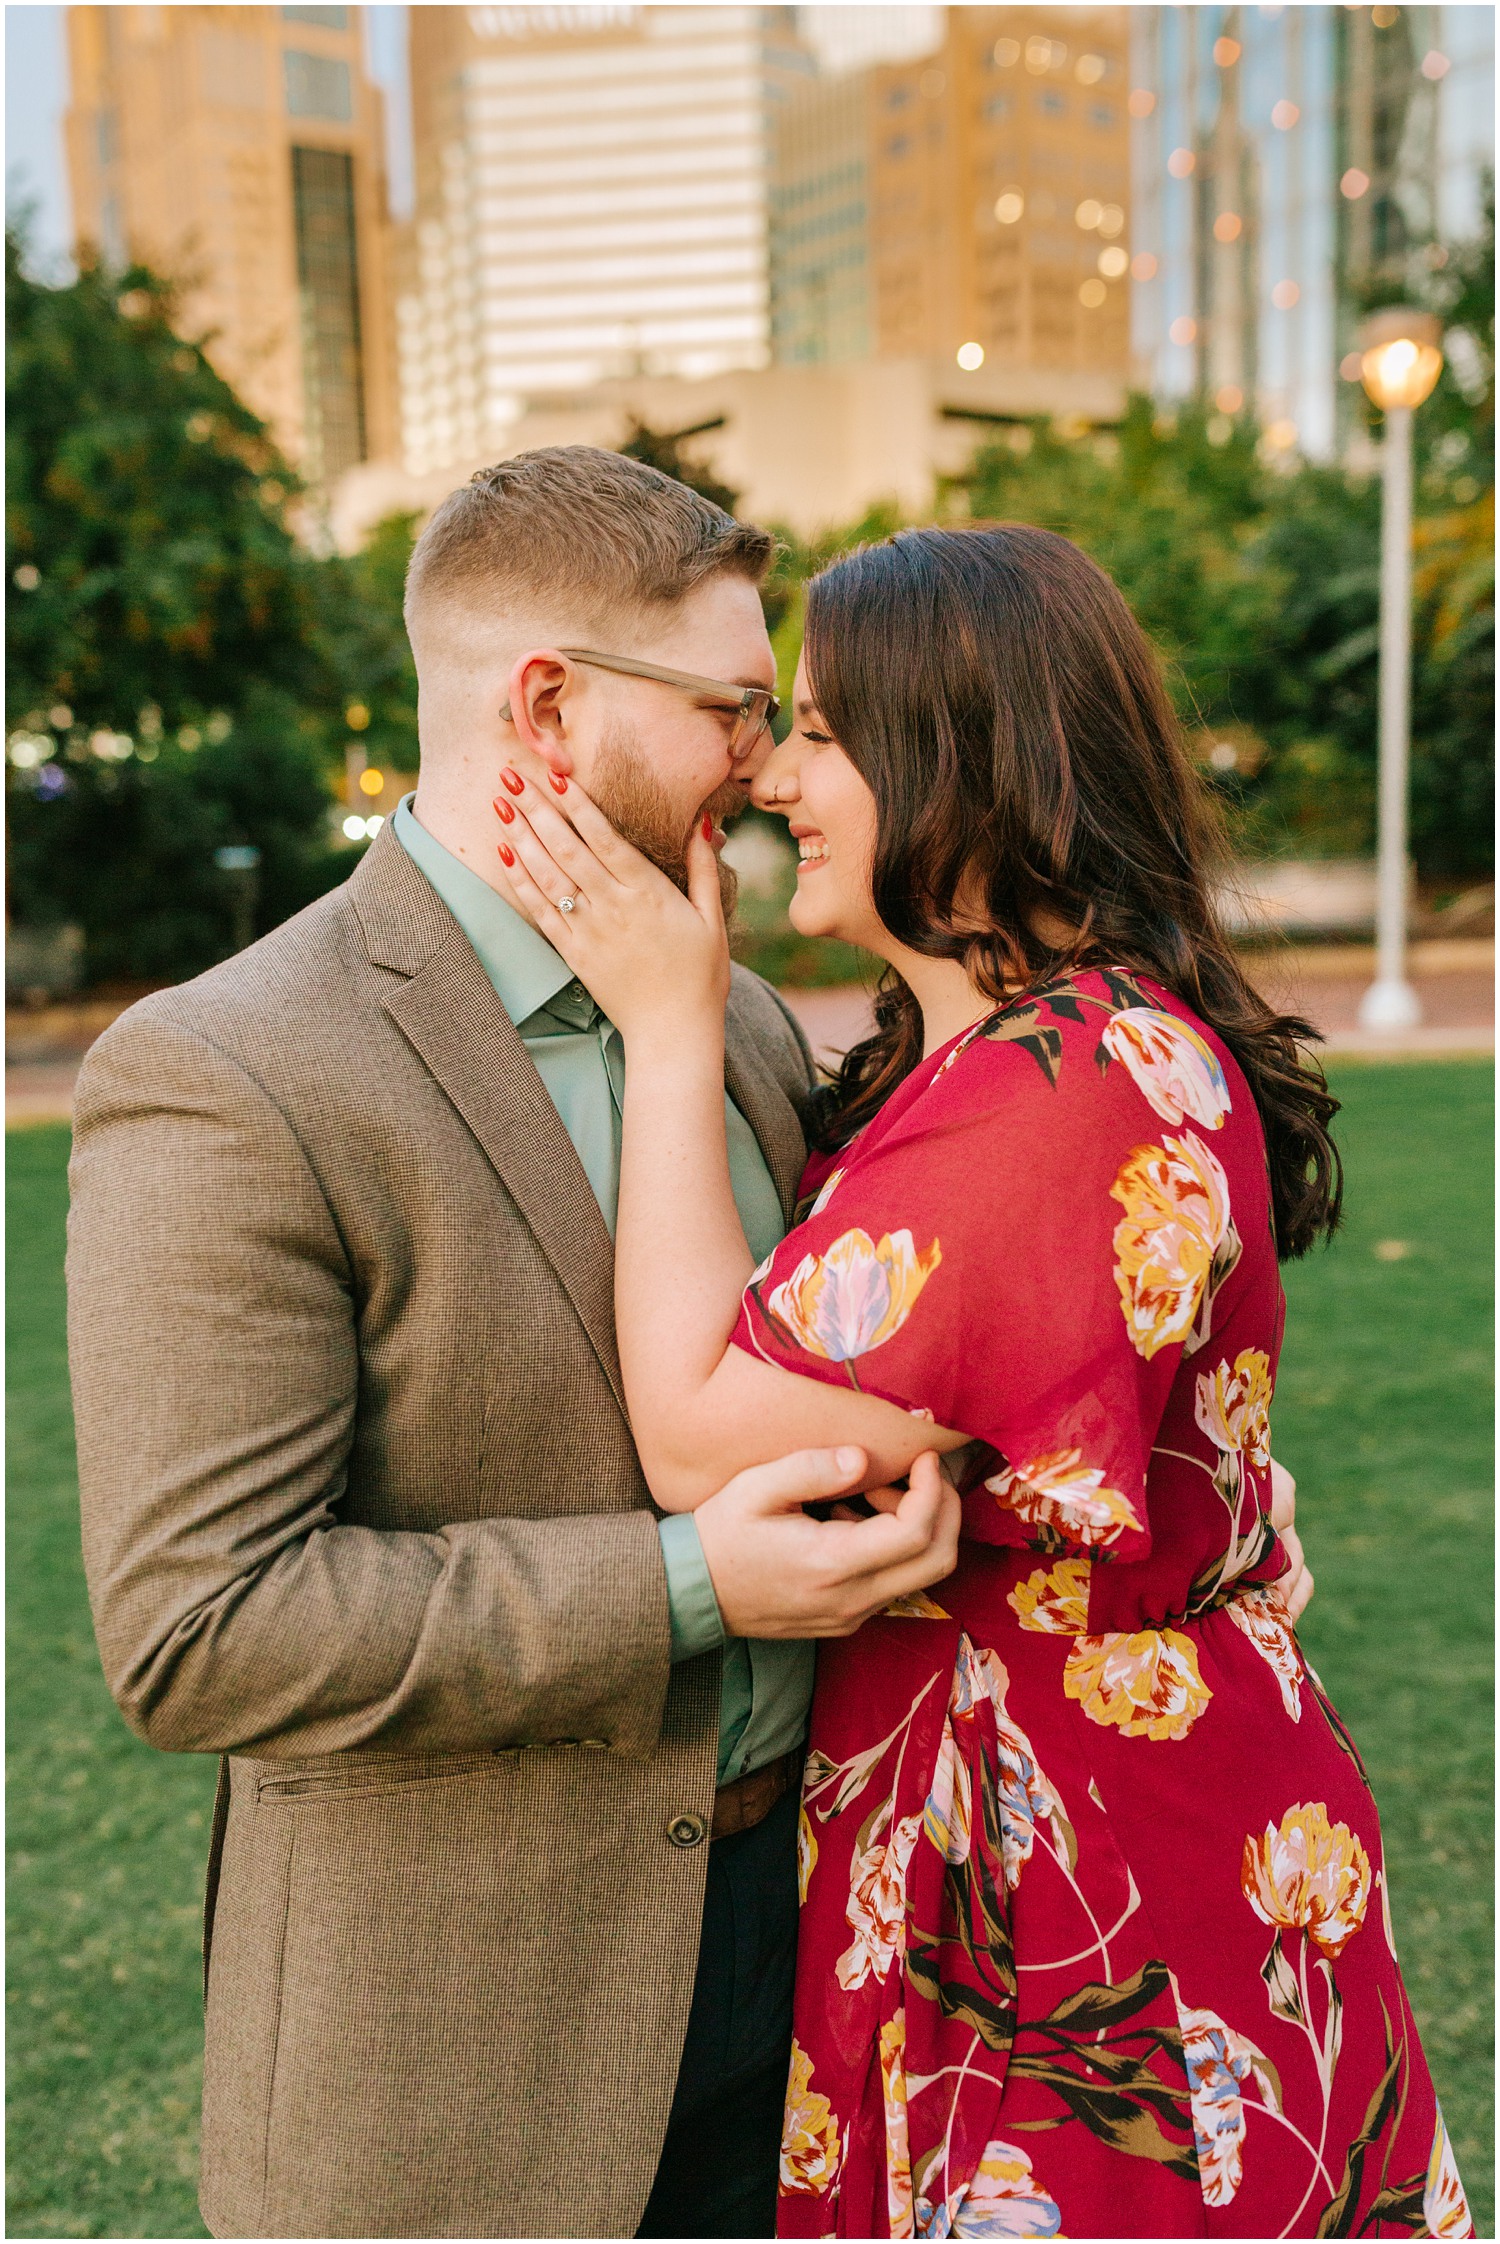 Engagement Session with couple in red dress and brown suit jacket